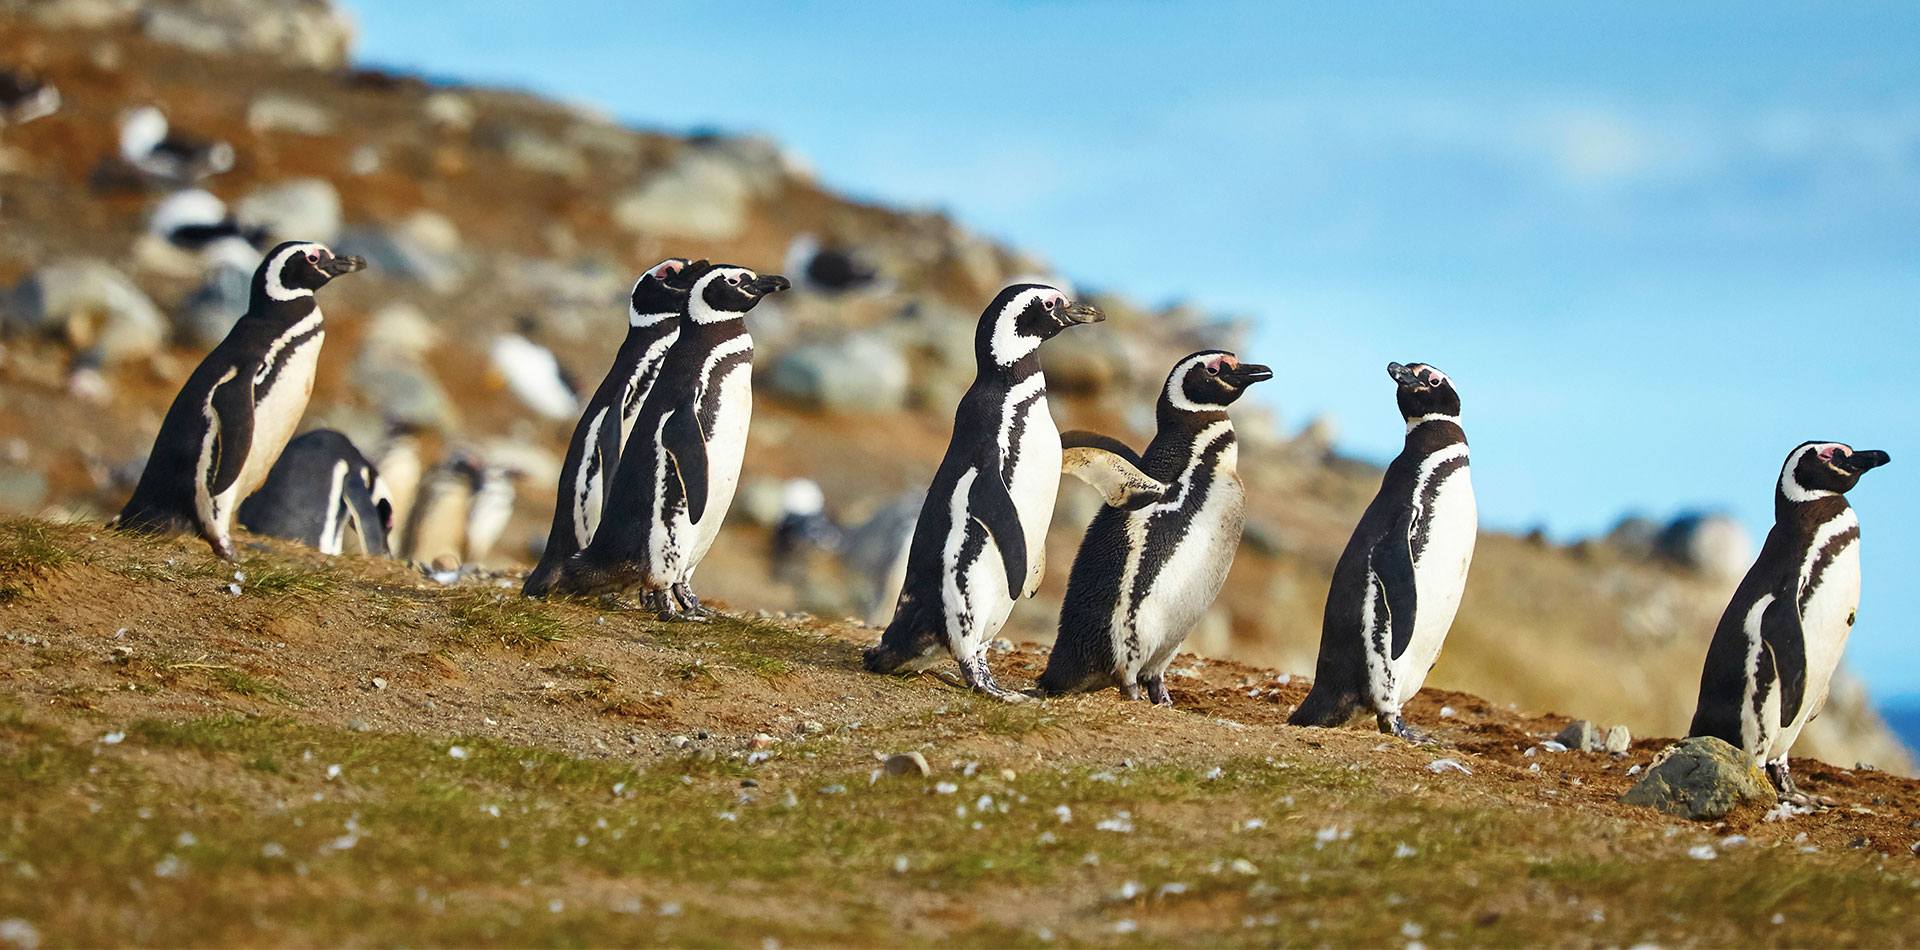 Magellanic penguins in natural environment, Chile